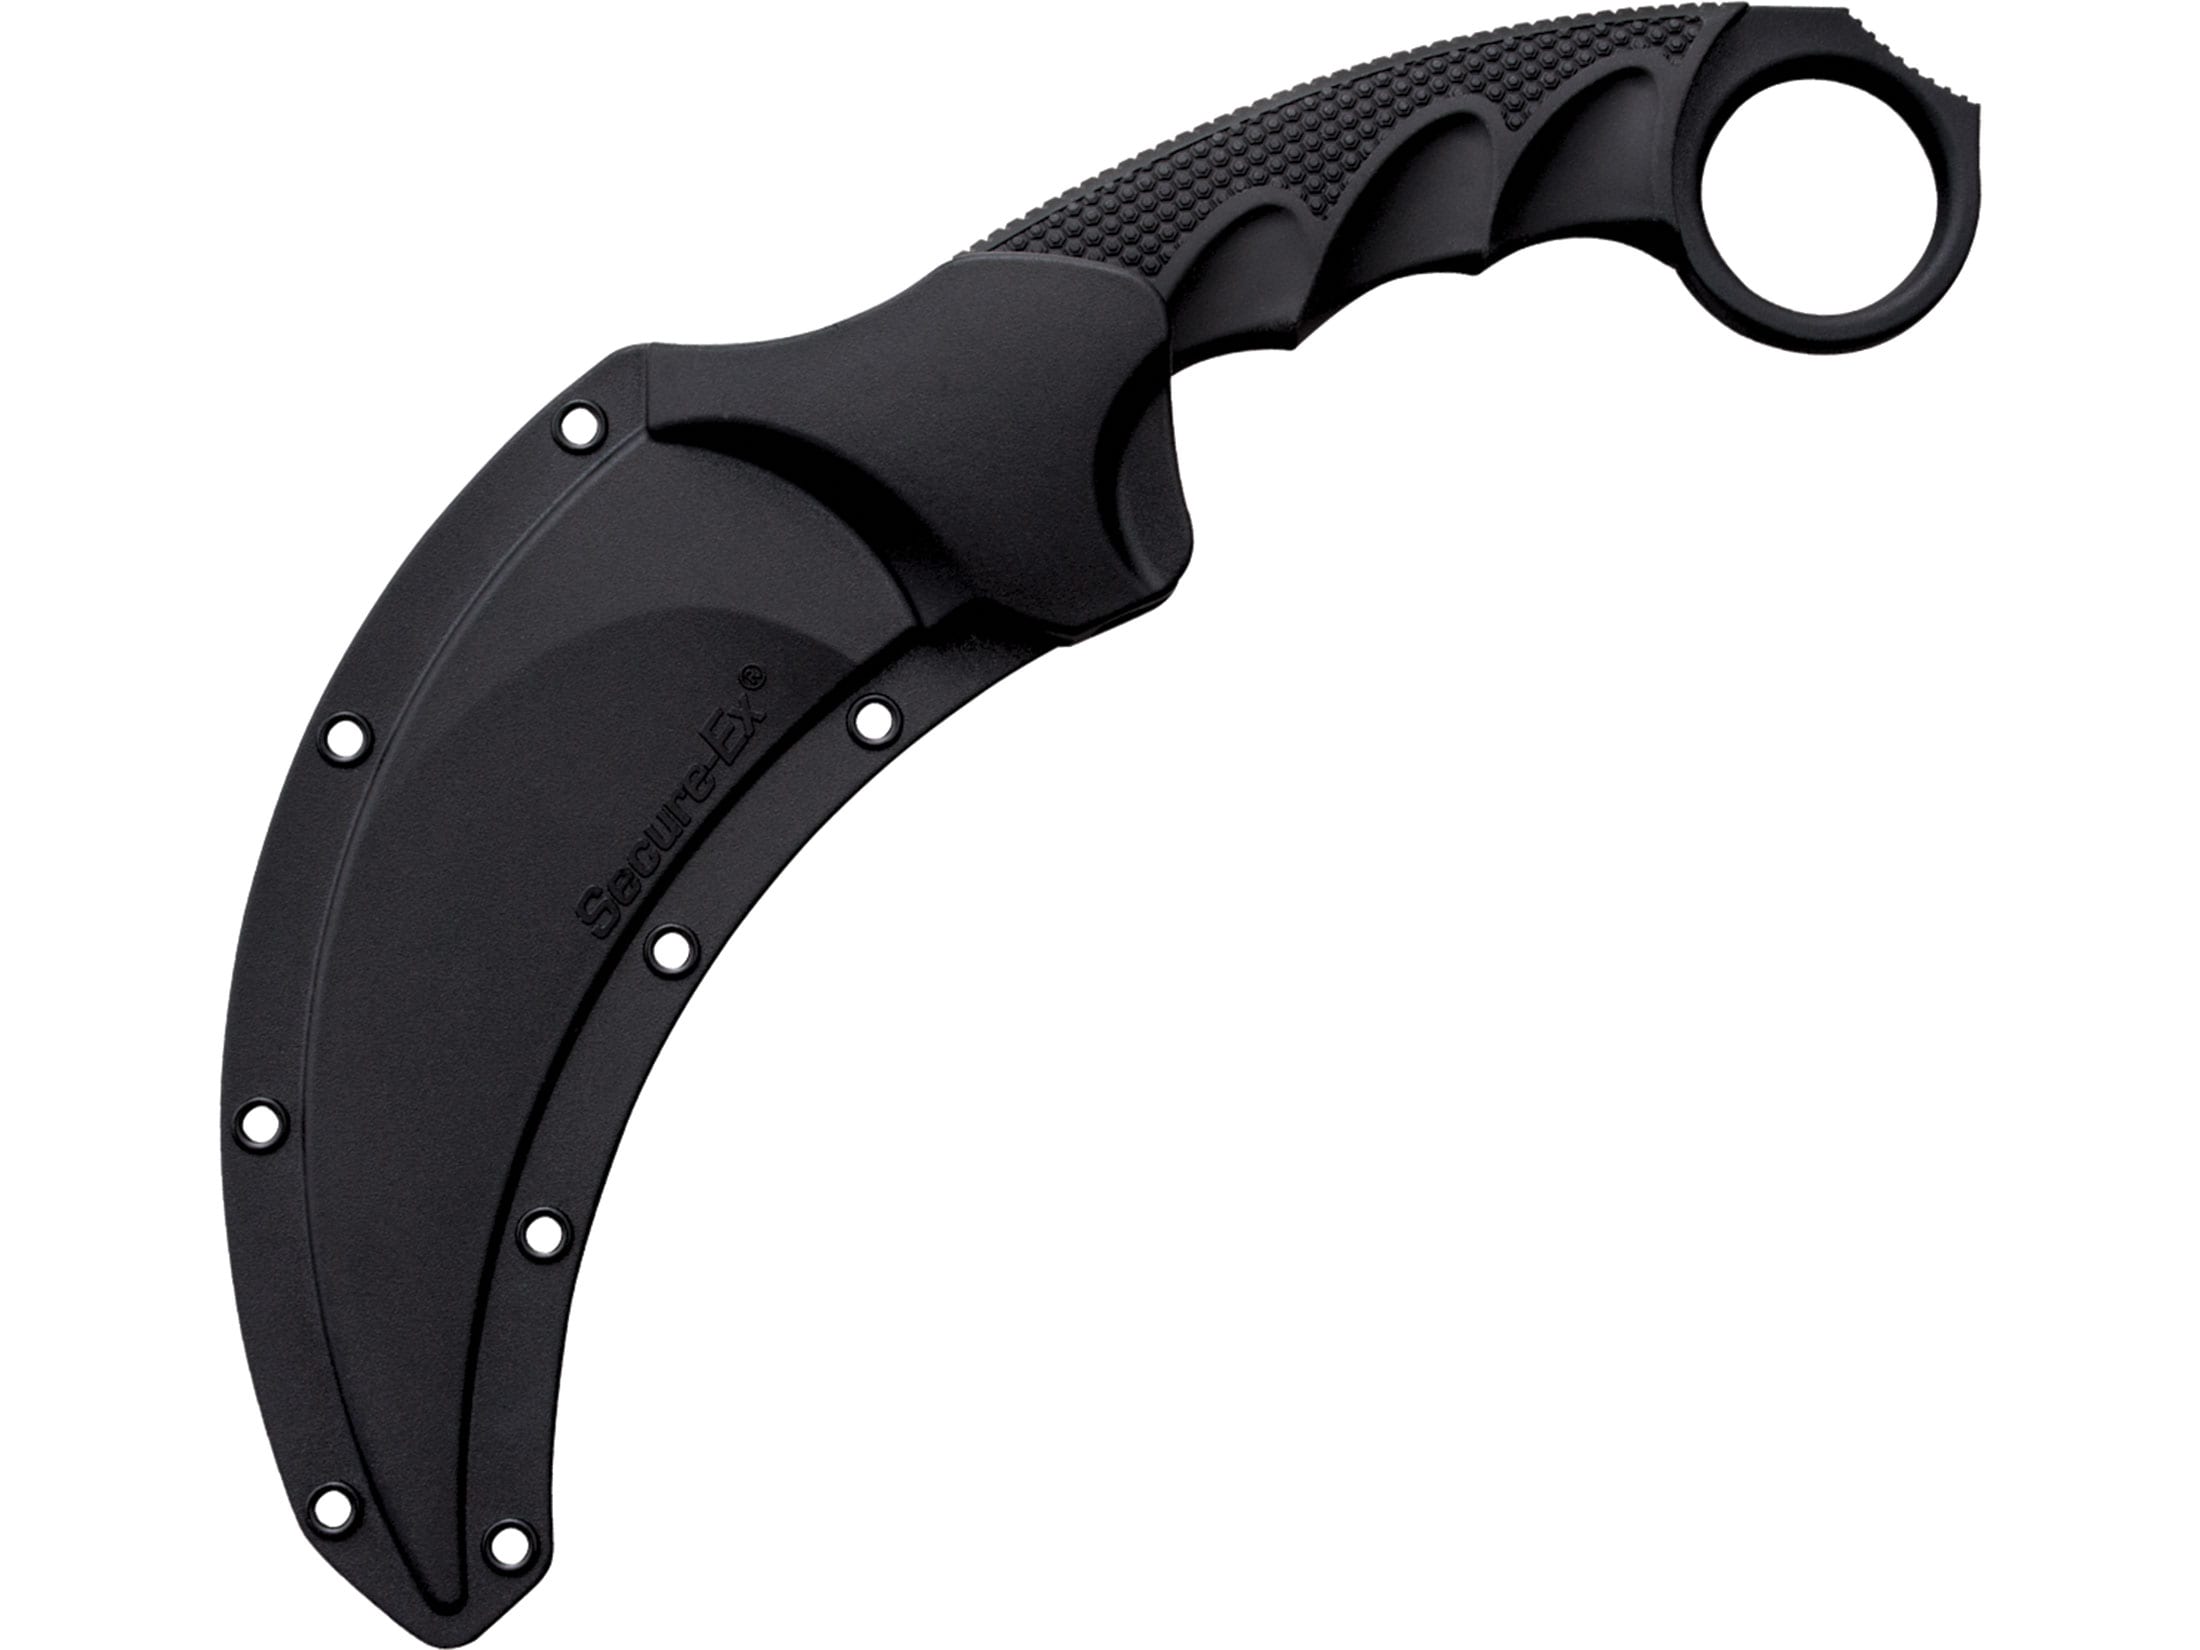 Cold Steel Steel Tiger Fixed Blade Knife 4.75″ Karambit AUS 8A Stainless Steel Blade Kray-Ex Handle Black For Sale